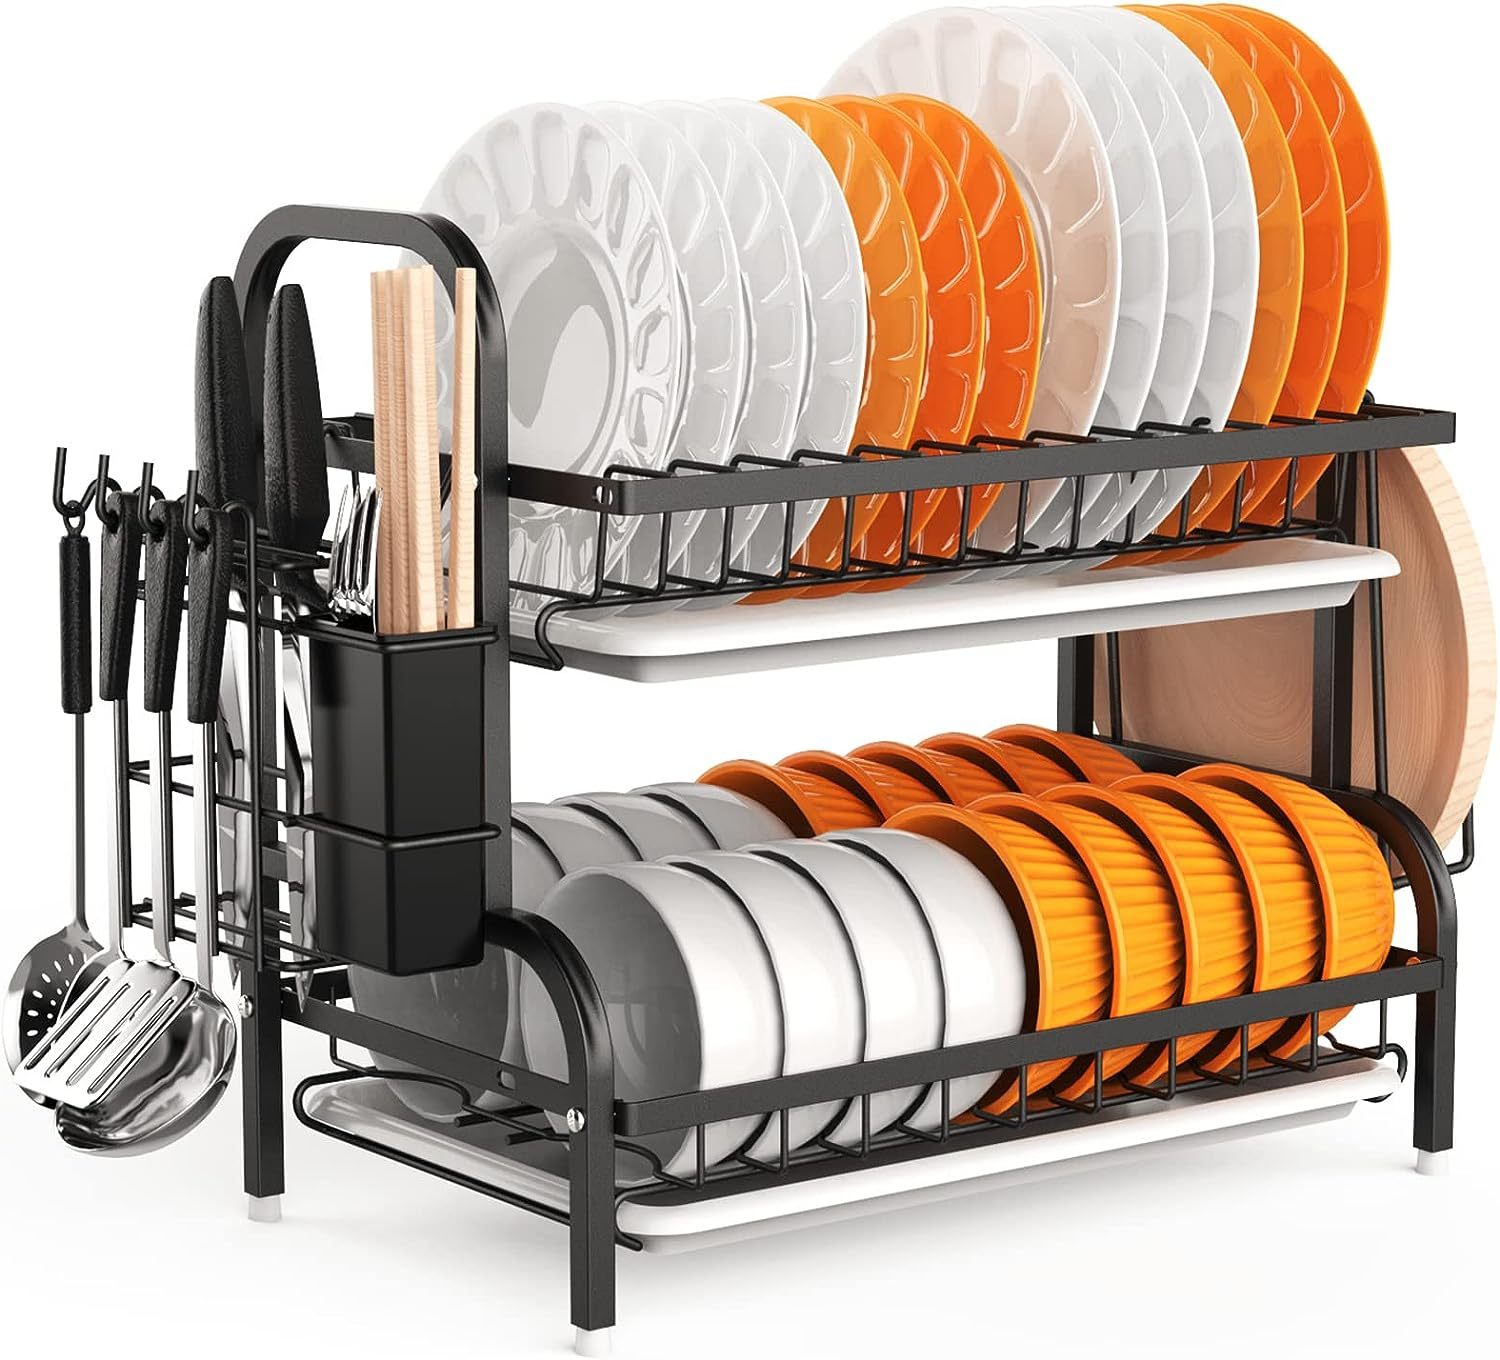 Dish Drying Rack, 2-Tier Dish Racks For Kitchen Counter, Sink Dish Drainer With Drainboard, Utensil Holder And Cutting Board Holder, Stainless Steel Kitchen Drying Rack-Black